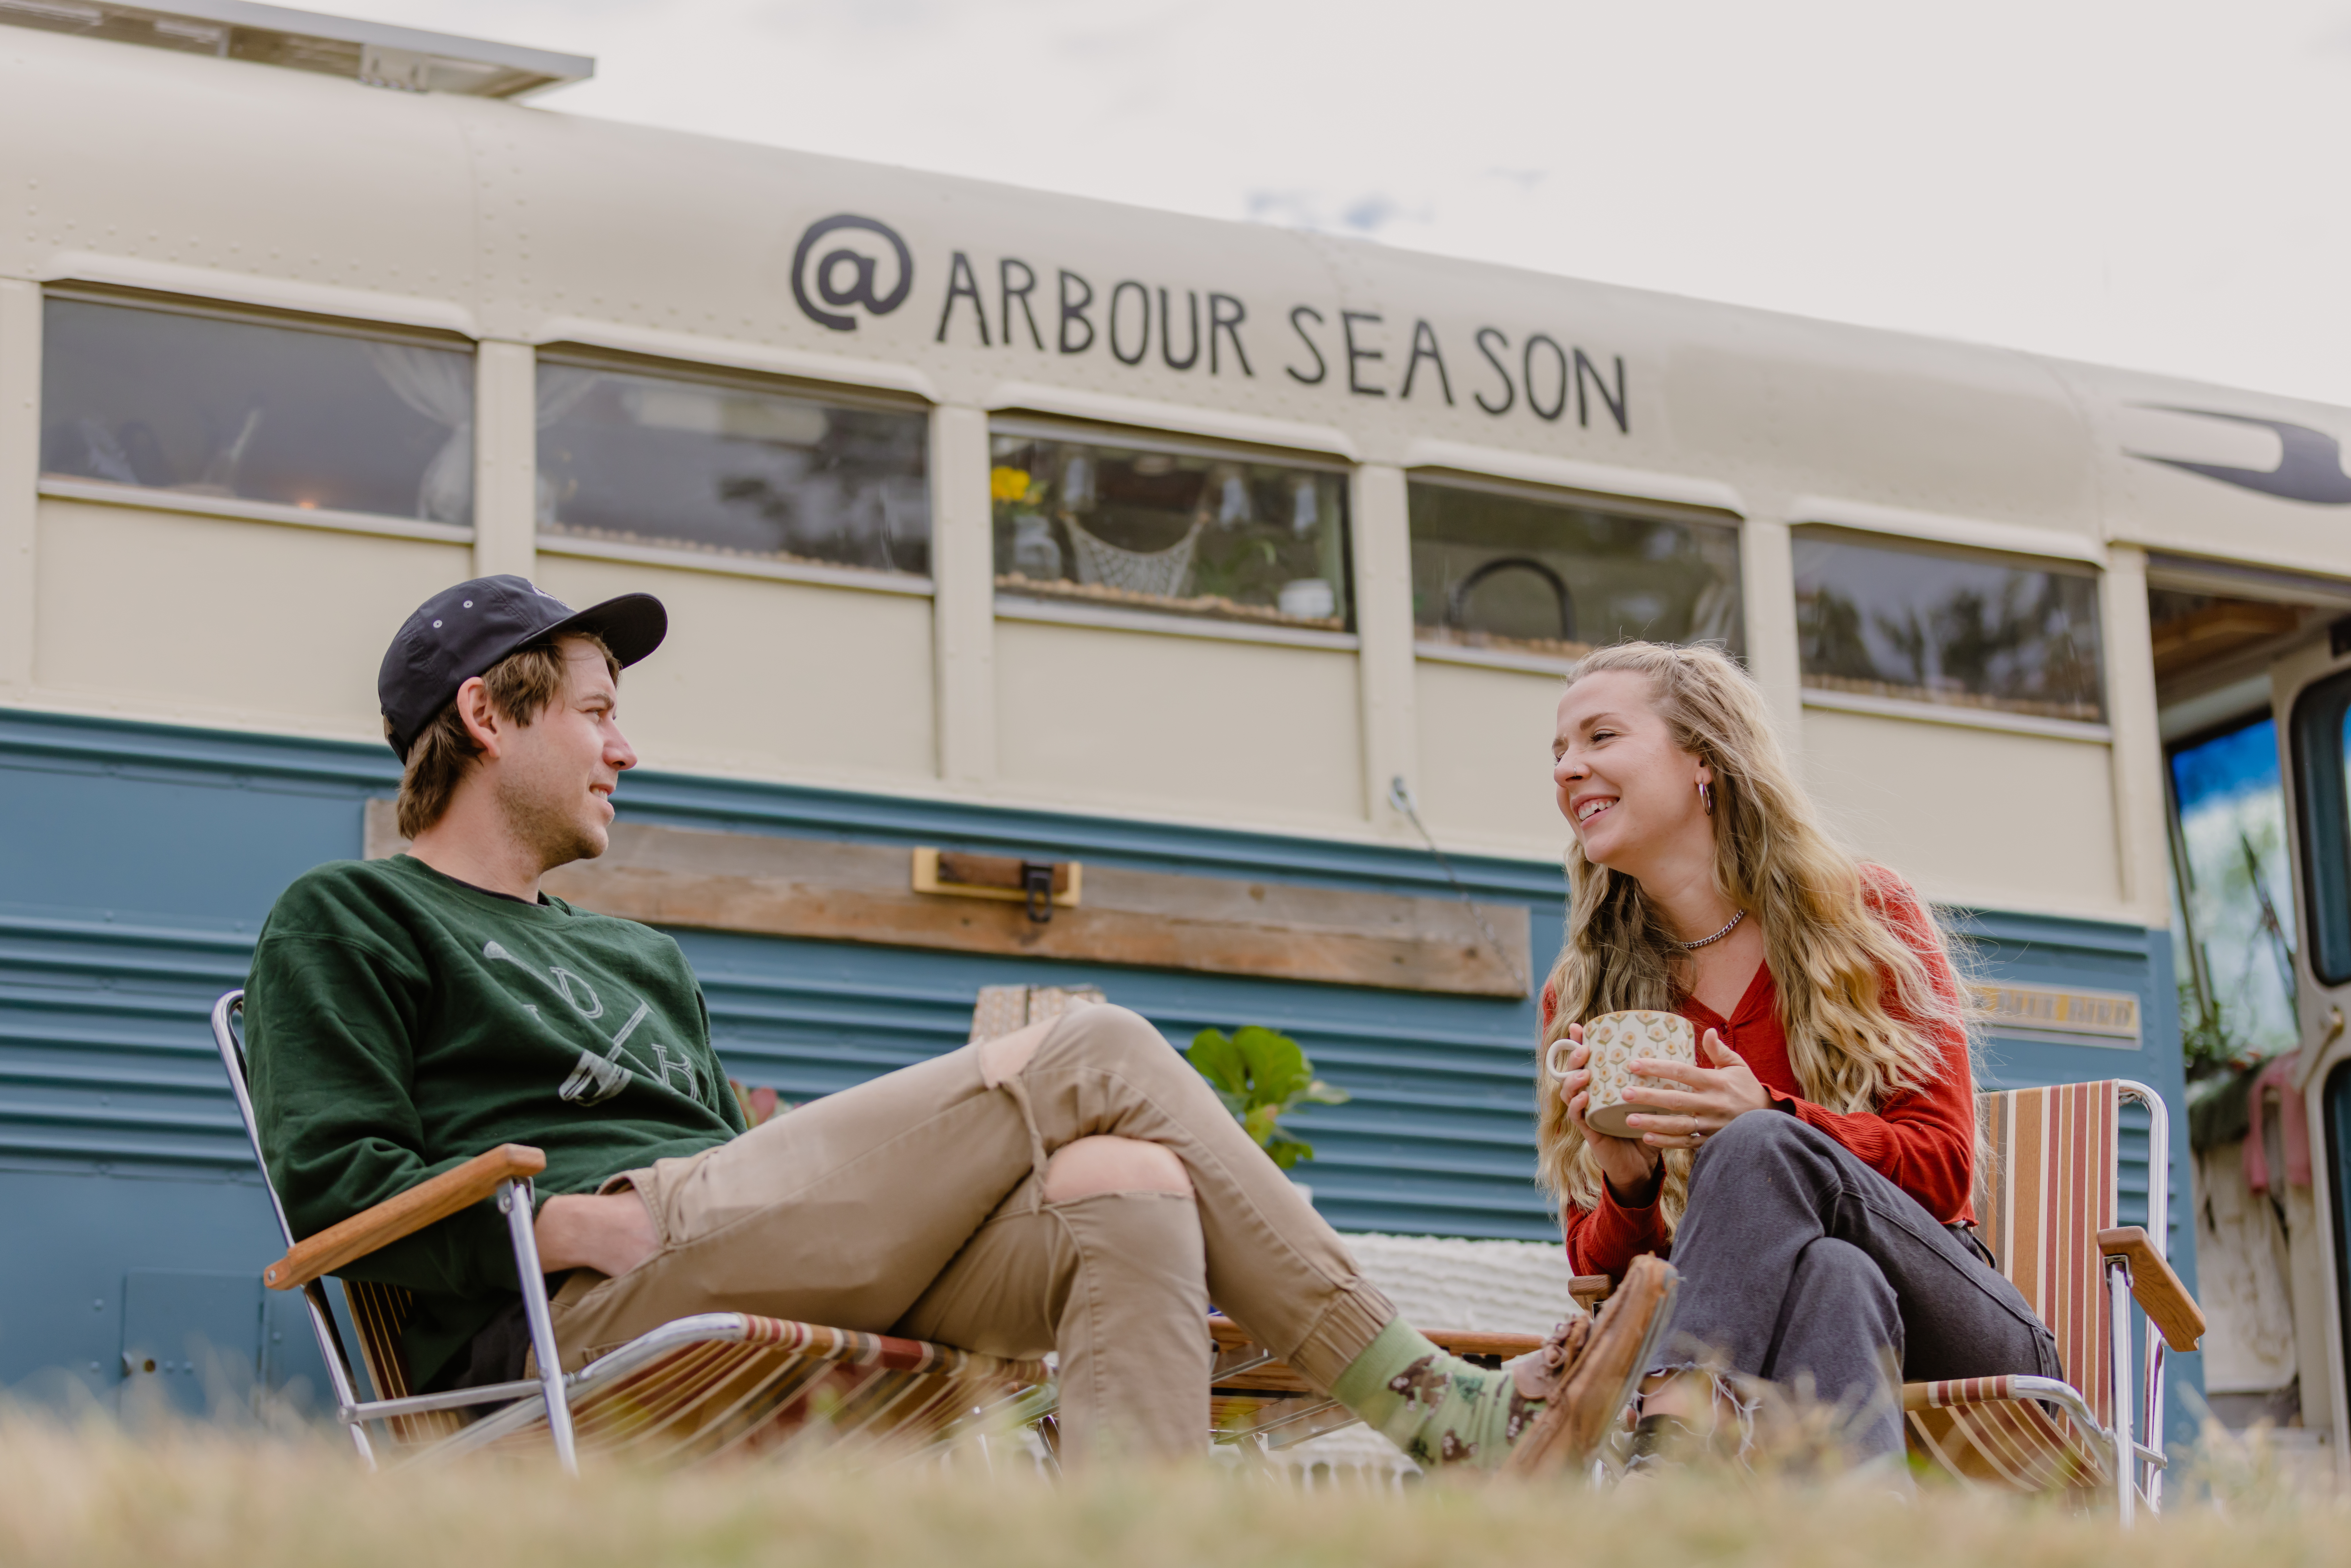 Shane and Emily From Arbour Season Having Coffee in Front of Their Converted Skoolie